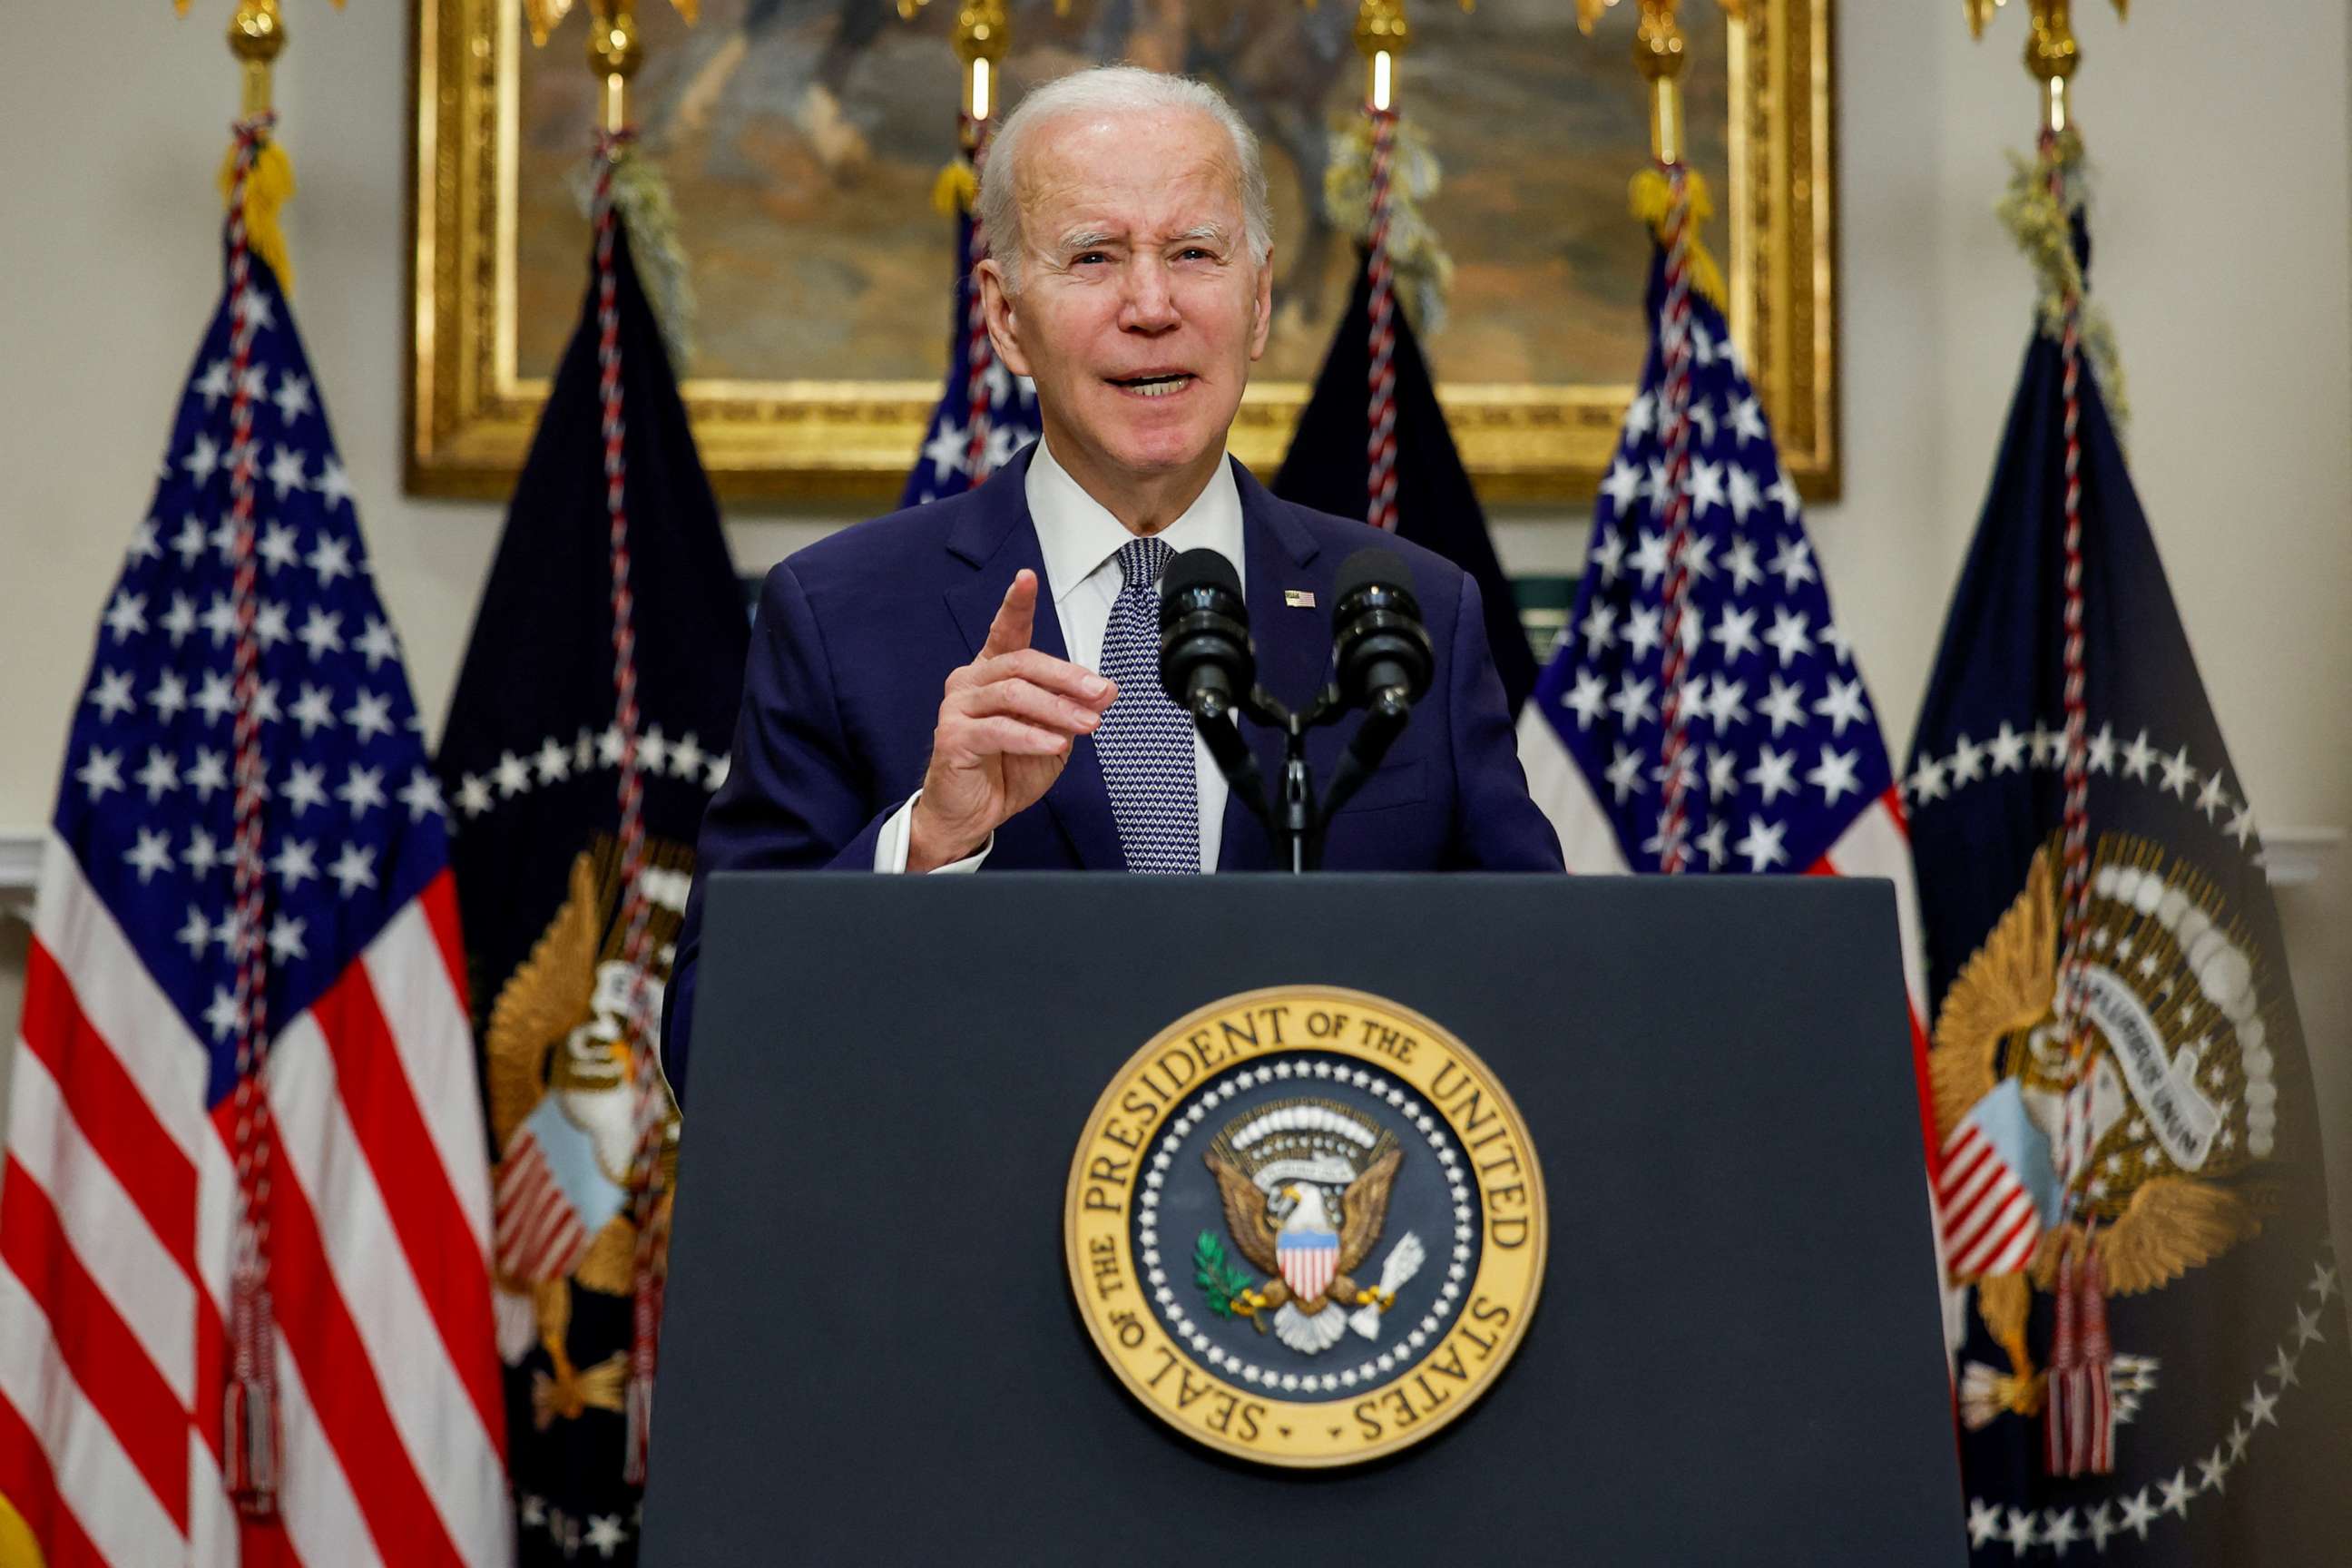 PHOTO: President Joe Biden delivers remarks on the banking crisis after the collapse of Silicon Valley Bank (SVB) and Signature Bank, in the Roosevelt Room at the White House in Washington, D.C., March 13, 2023.